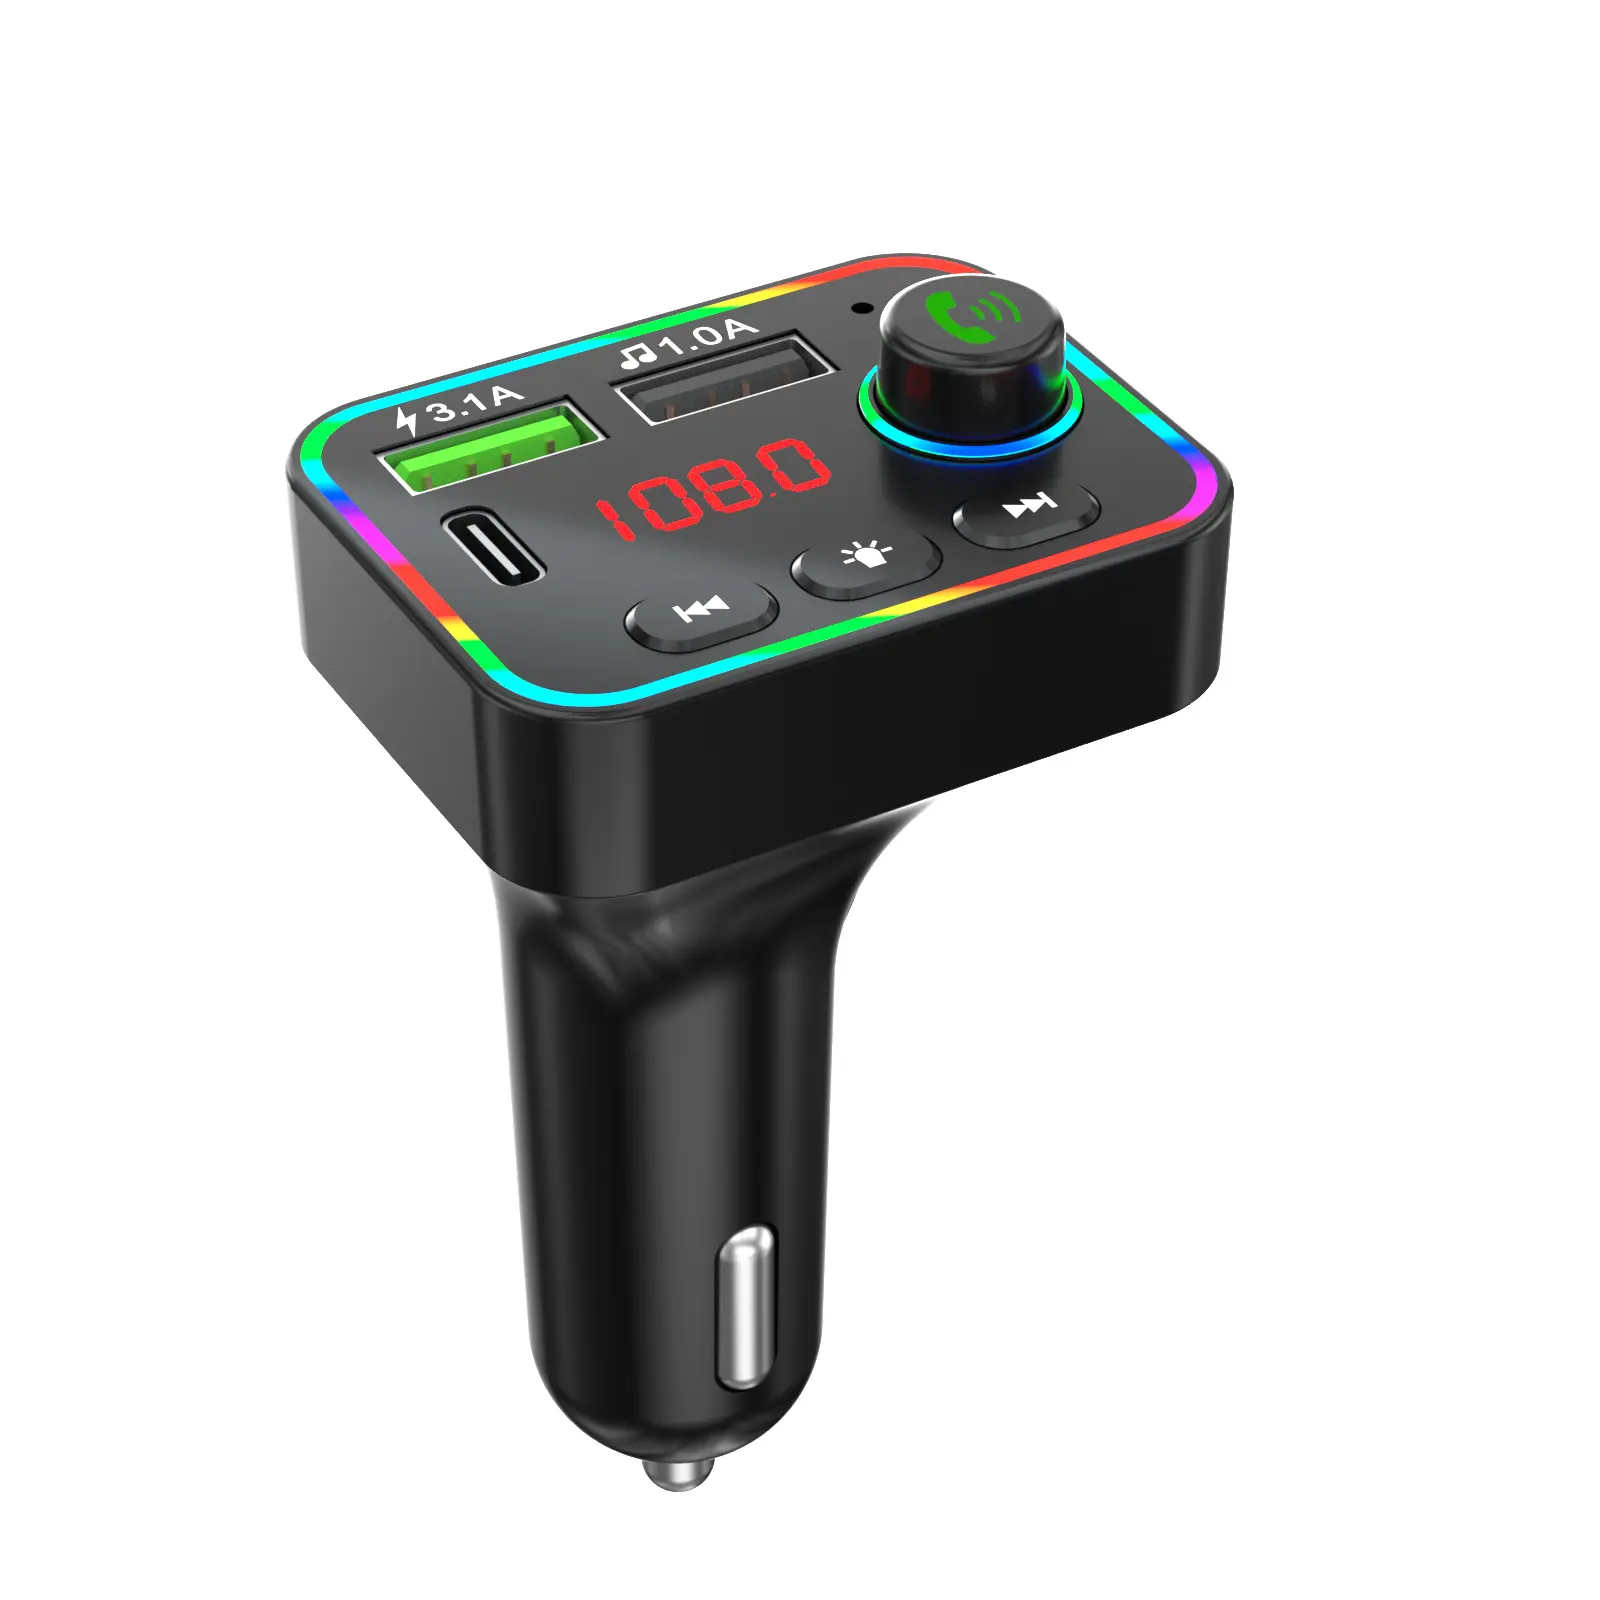 Car player MP3 player USB charger, F4 wireless LED display BT FM transmitter